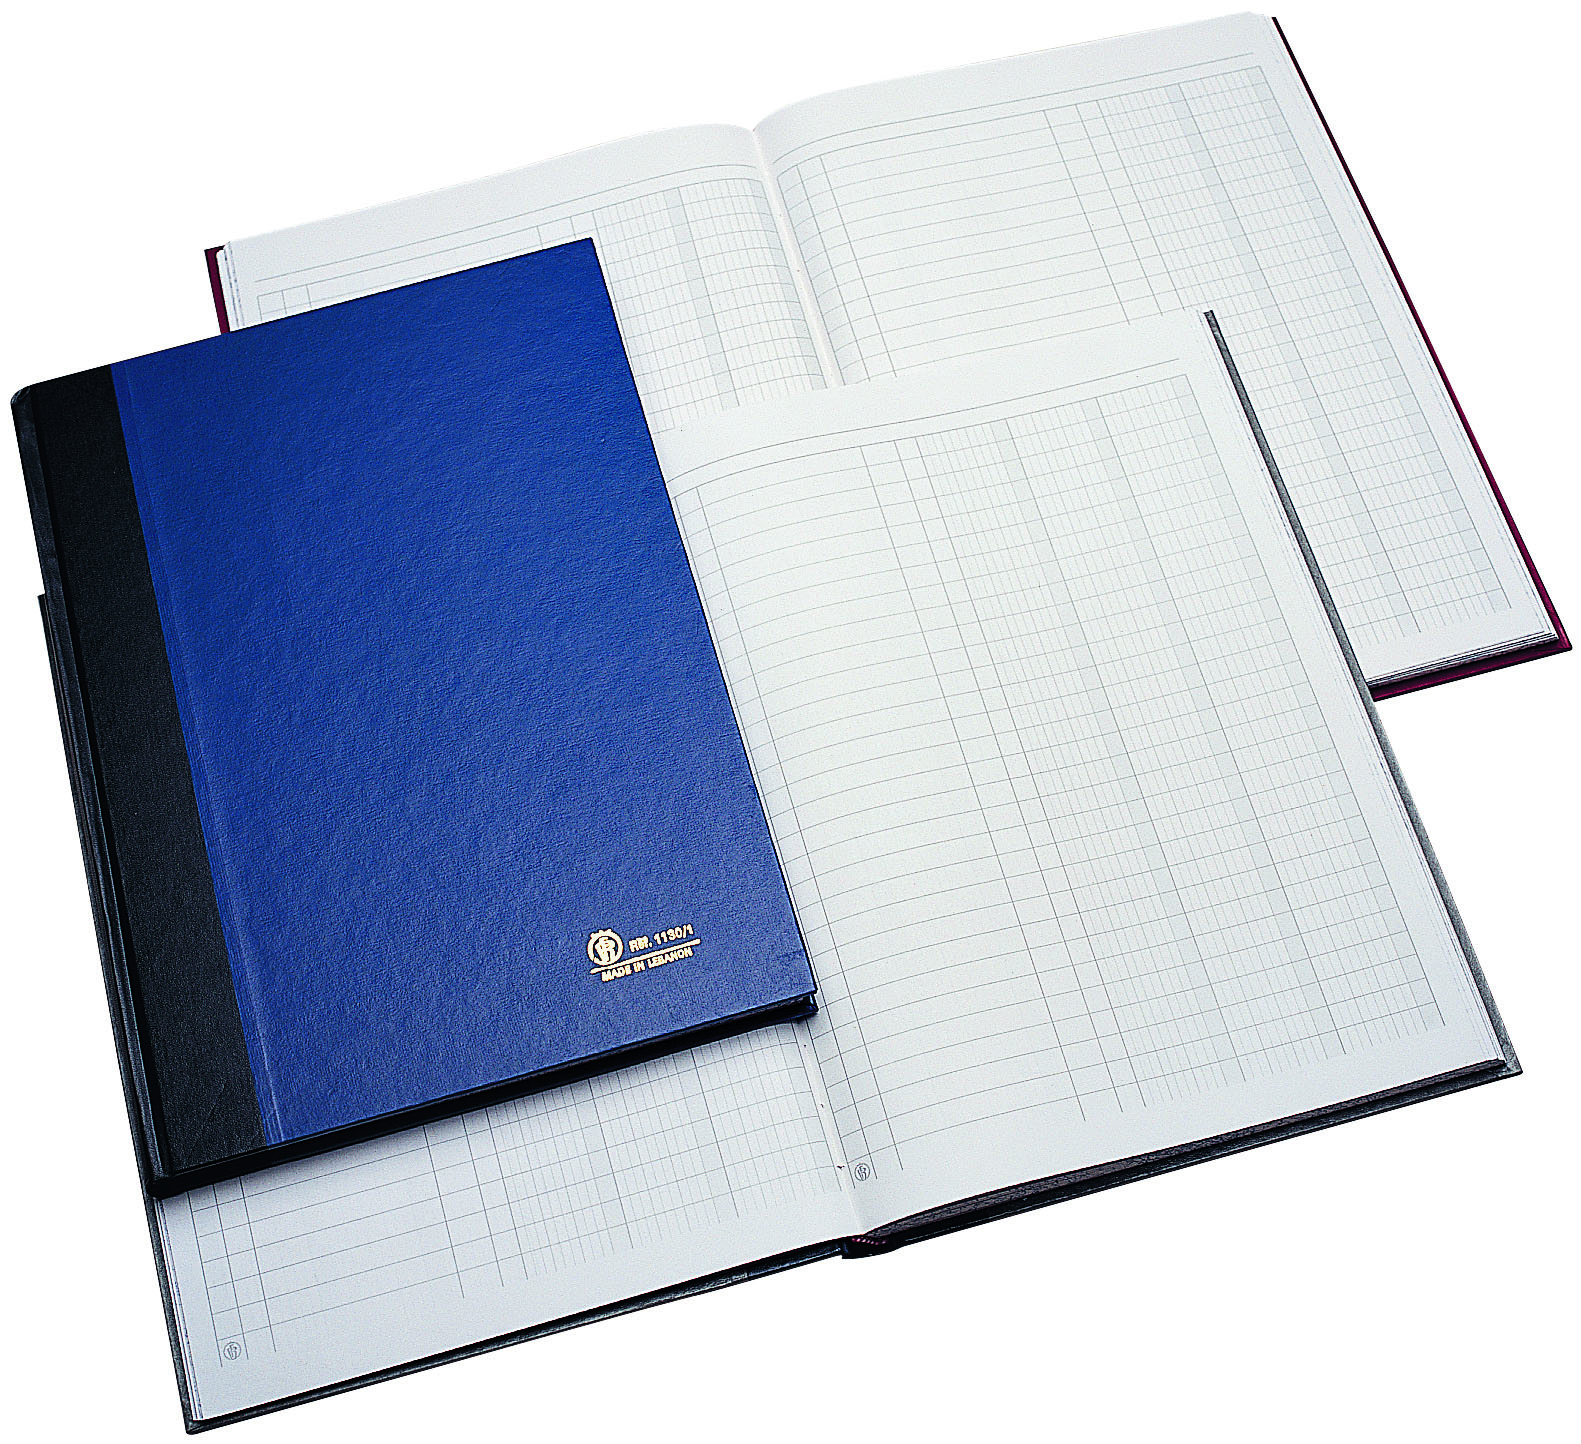 Auxiliary A/c book, 25x35, 3 col, 100 sheets